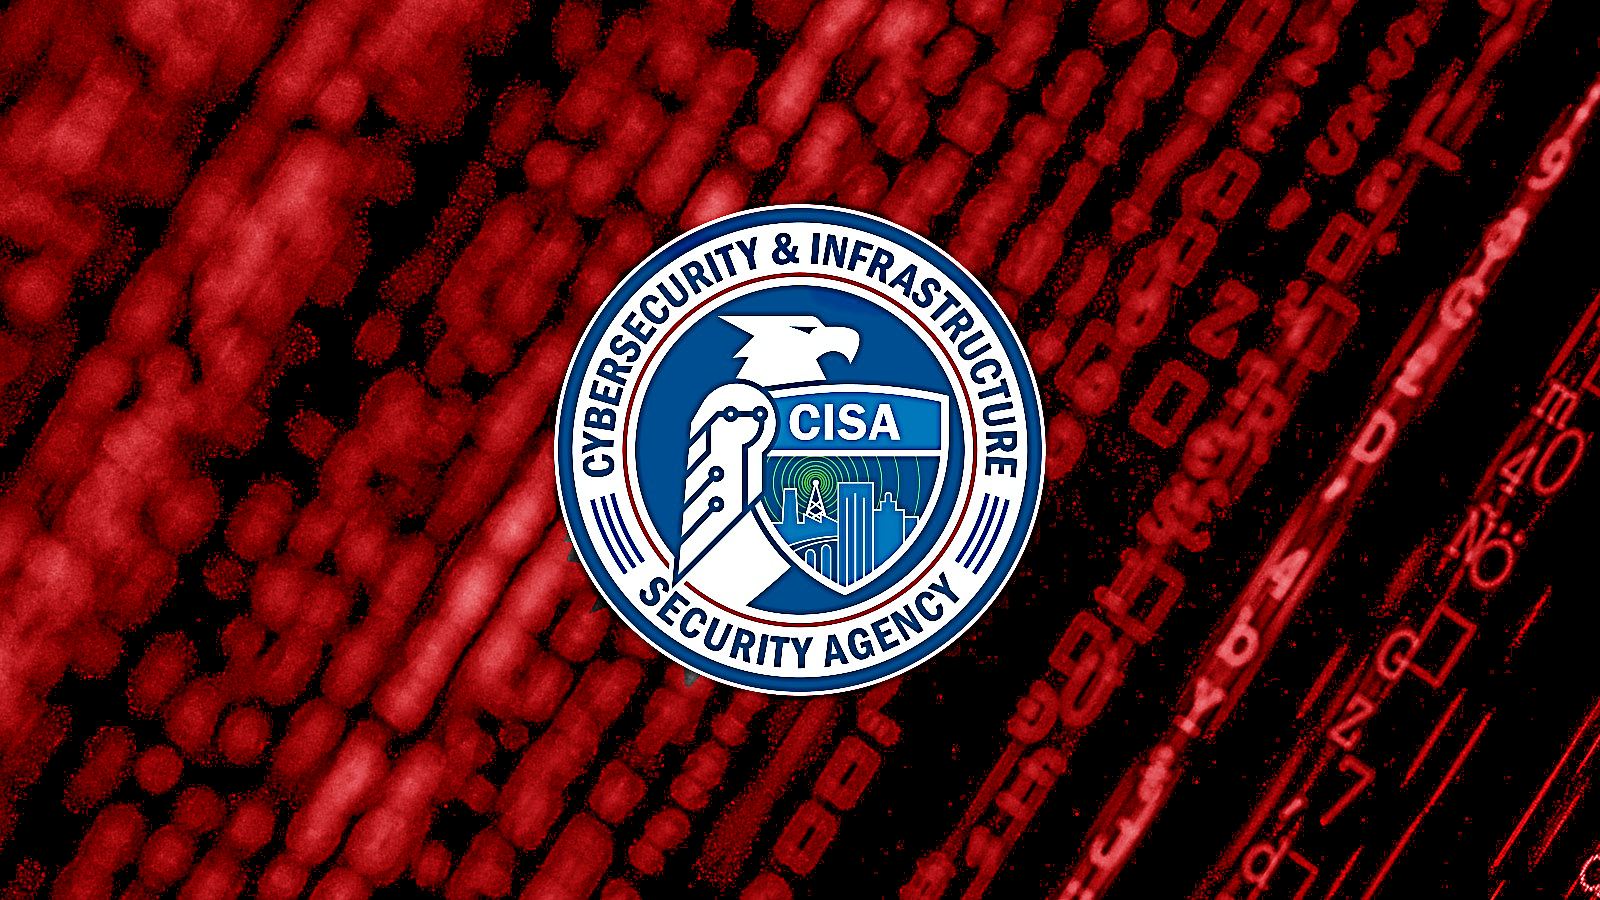 CISA urges software devs to weed out SQL injection vulnerabilities – Source: www.bleepingcomputer.com